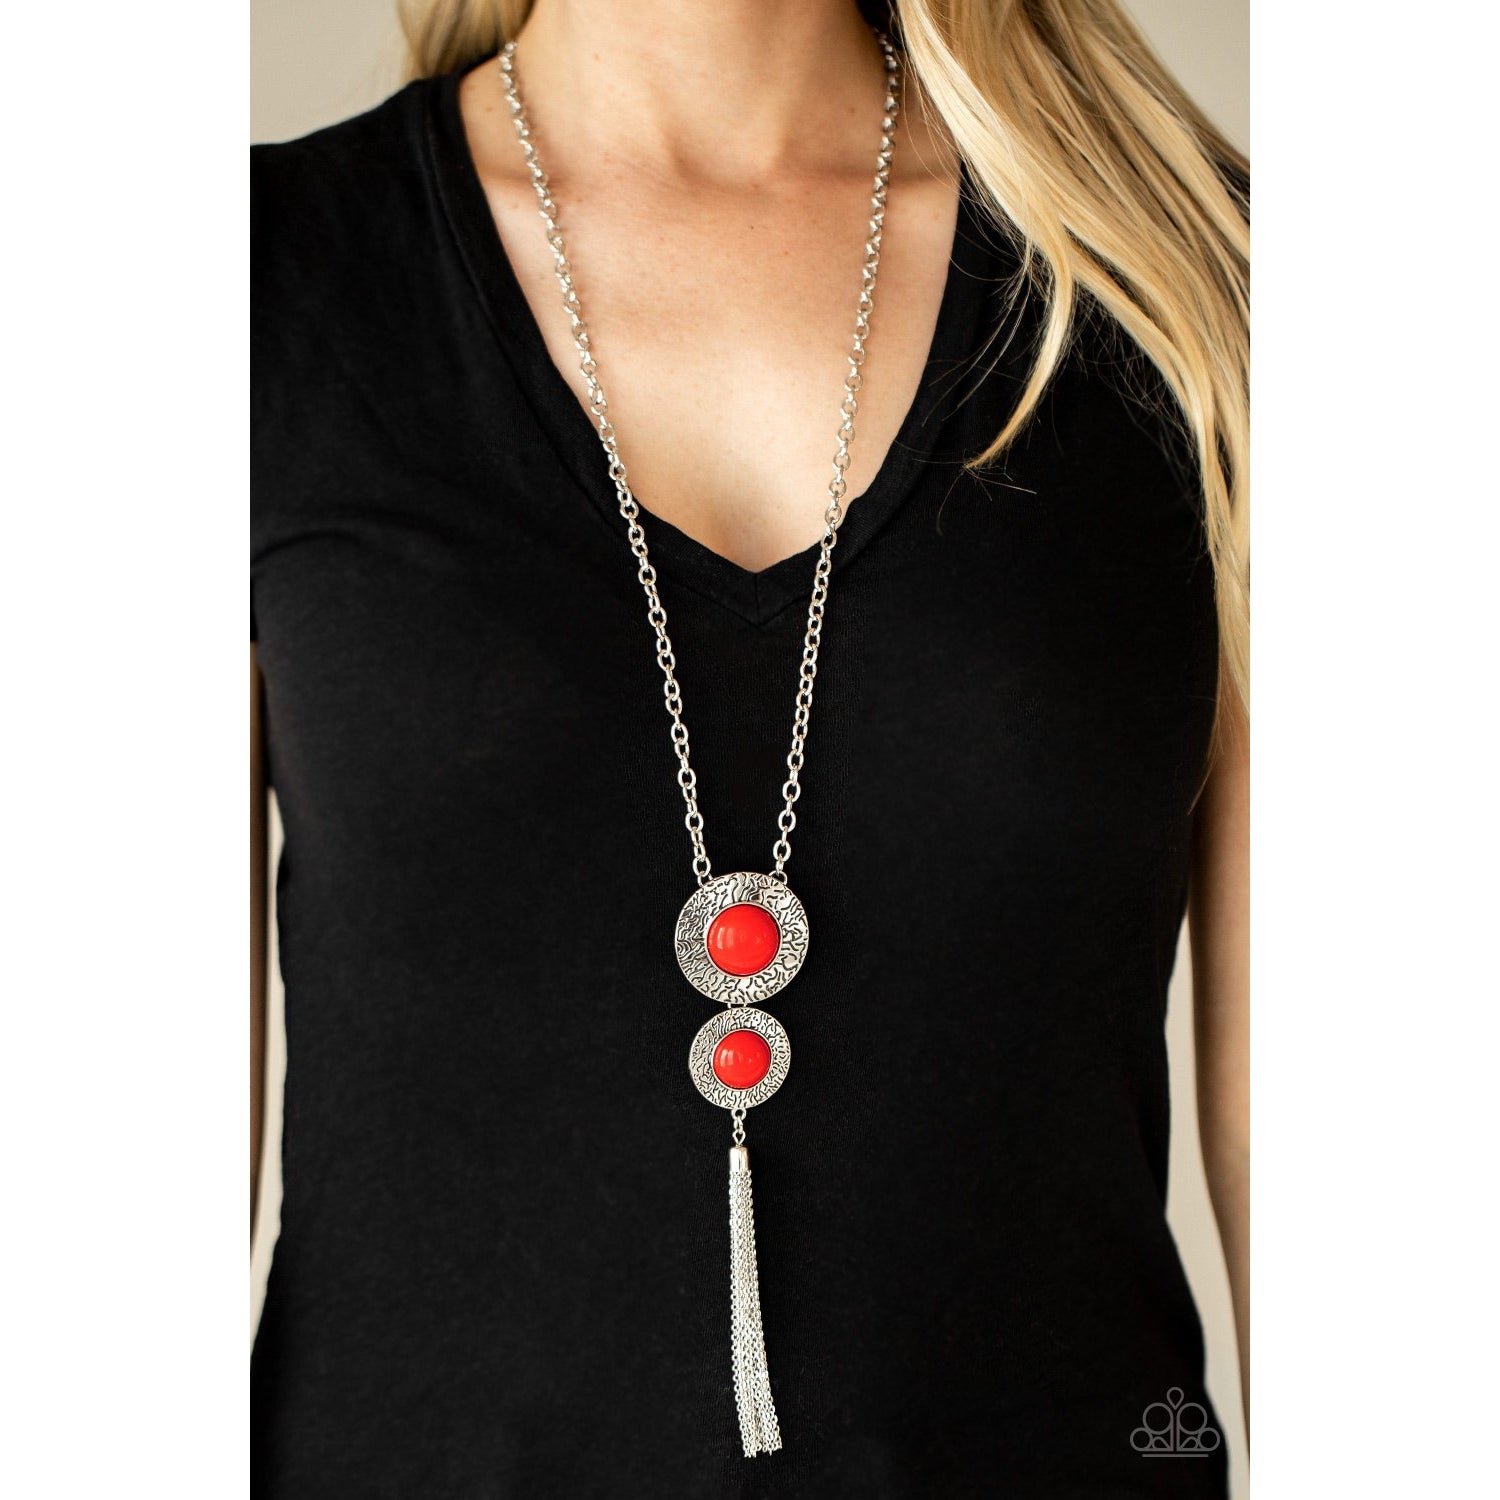 Abstract Artistry - Red Necklace - Paparazzi Accessories - GlaMarous Titi Jewels